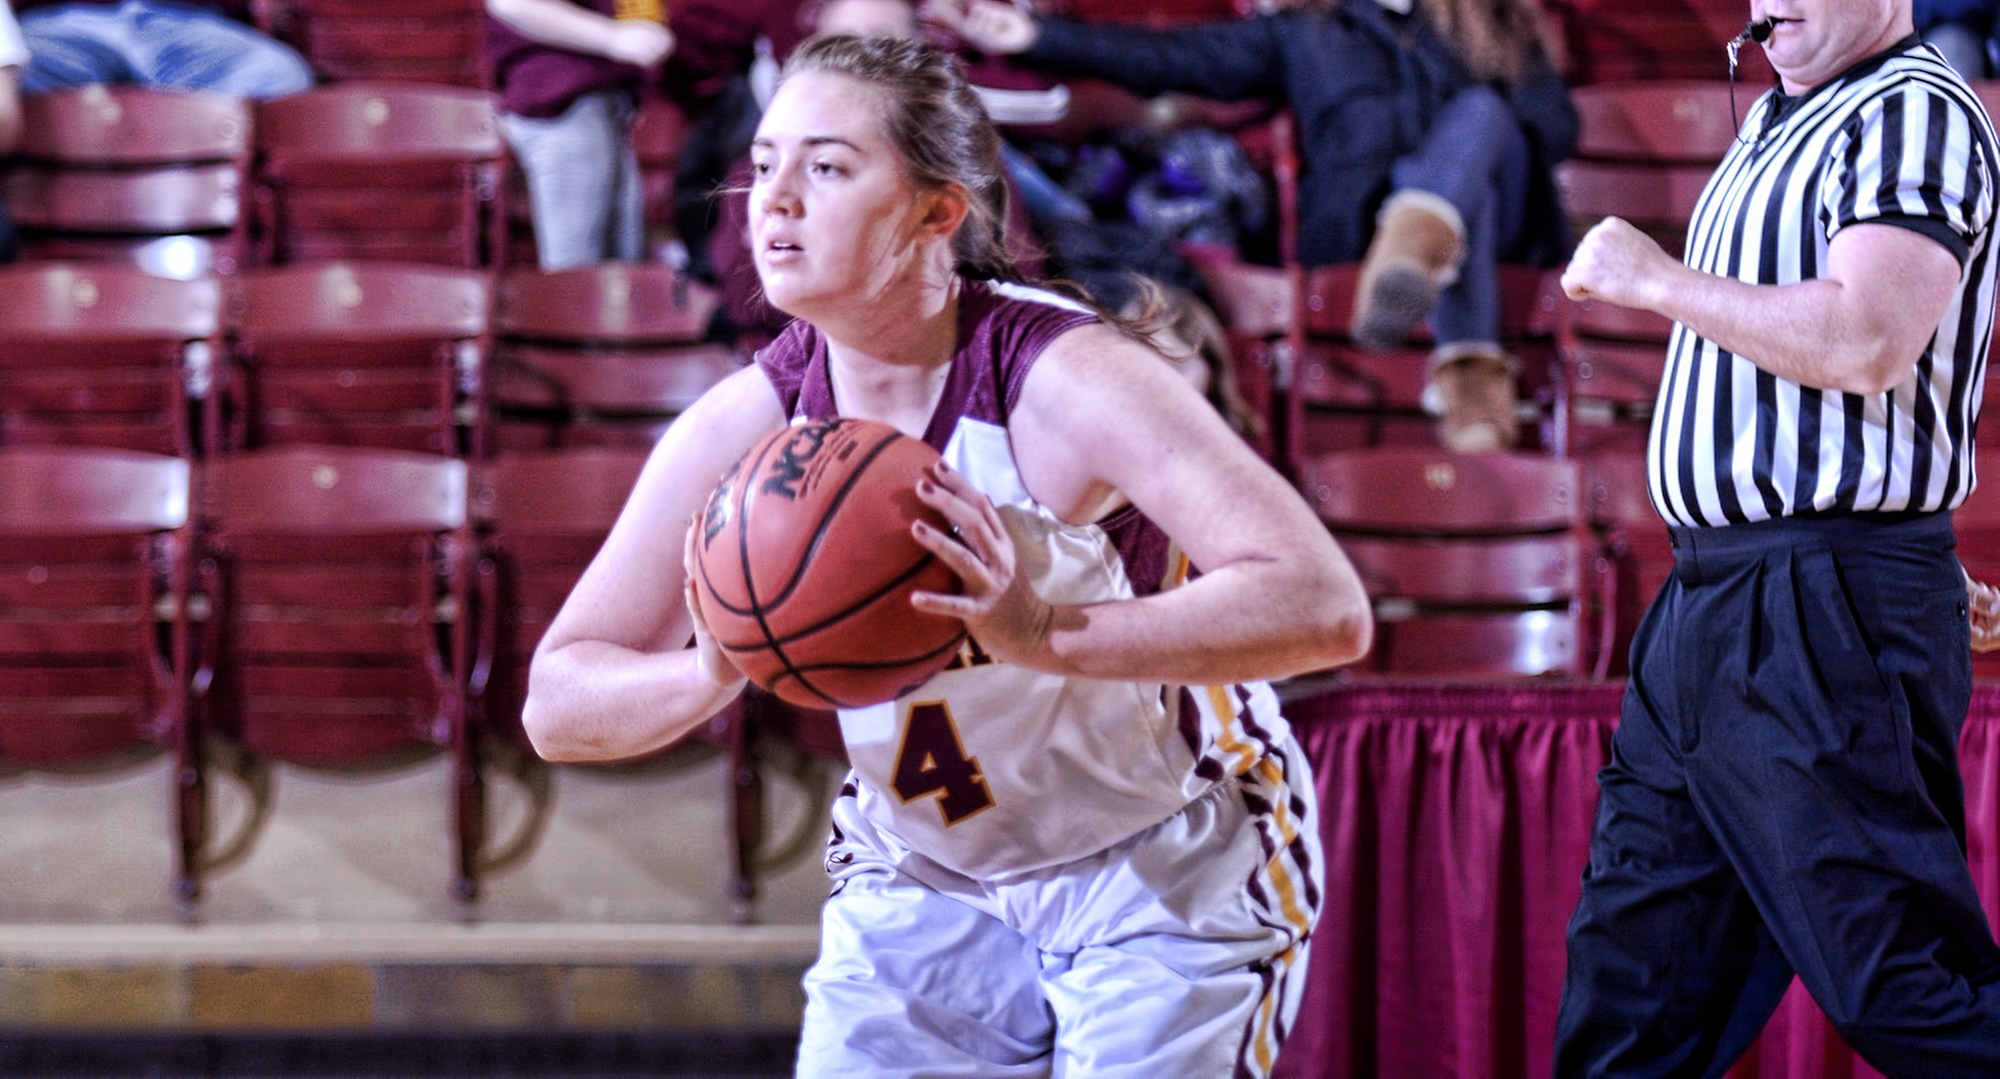 Junior Jamie Mentzer scored eight of her game-high 14 points in the fourth quarter in the Cobbers' win at Augsburg.